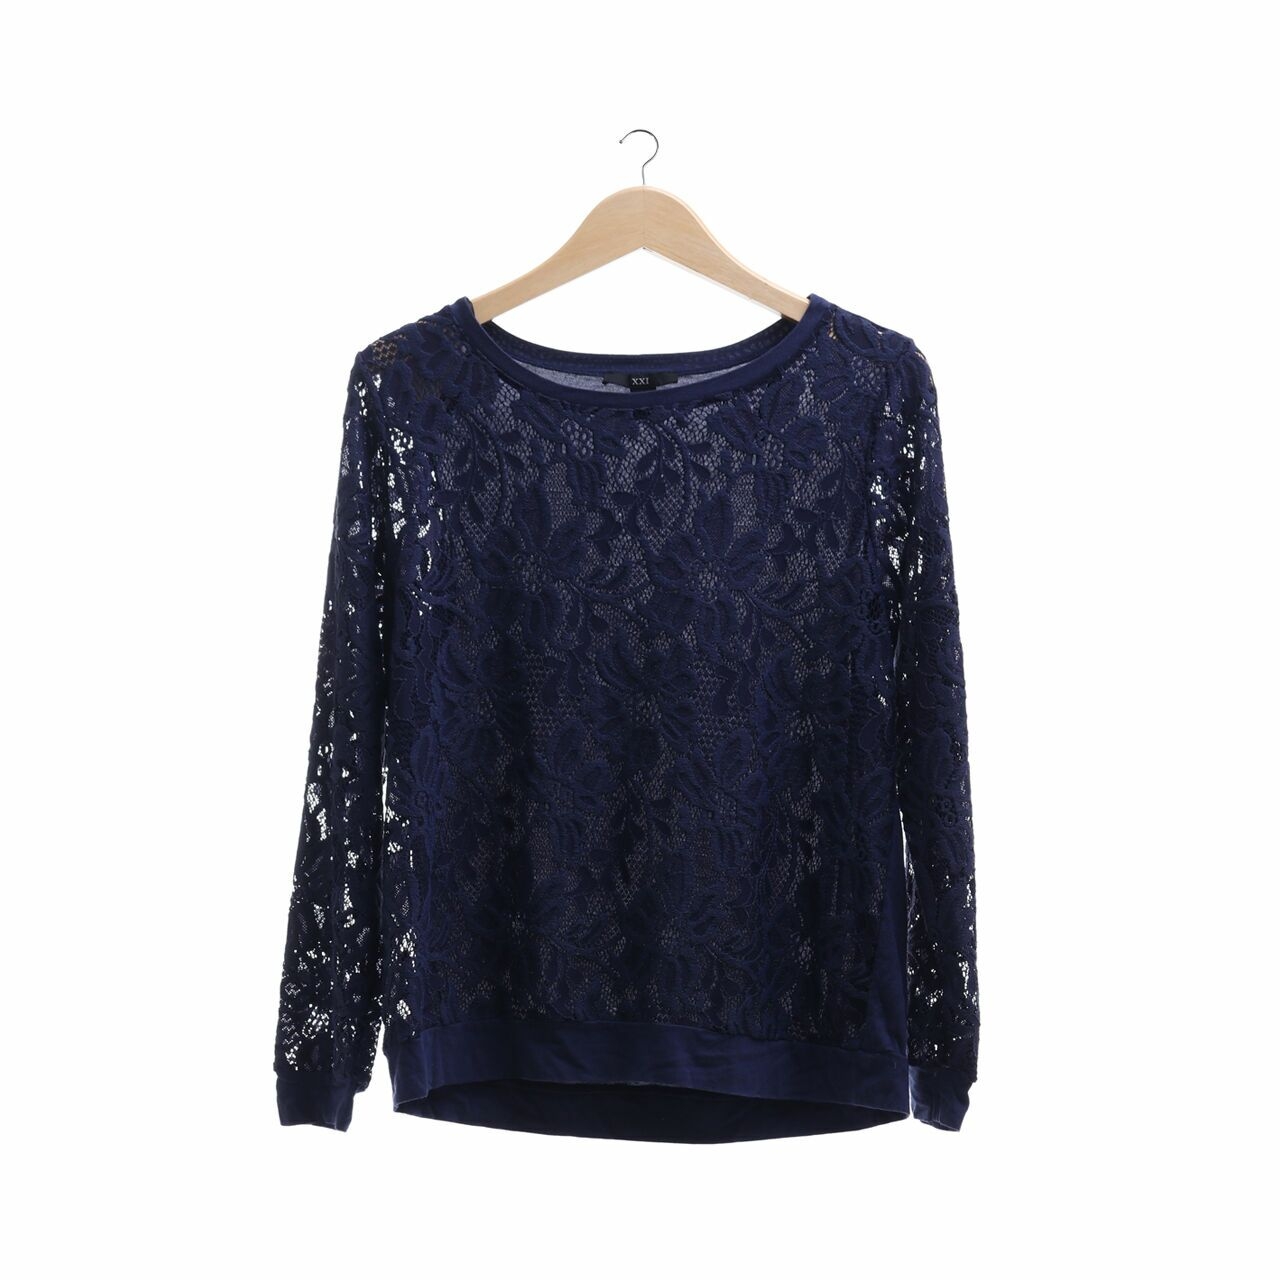 Forever 21 Dark Blue Lace Blouse